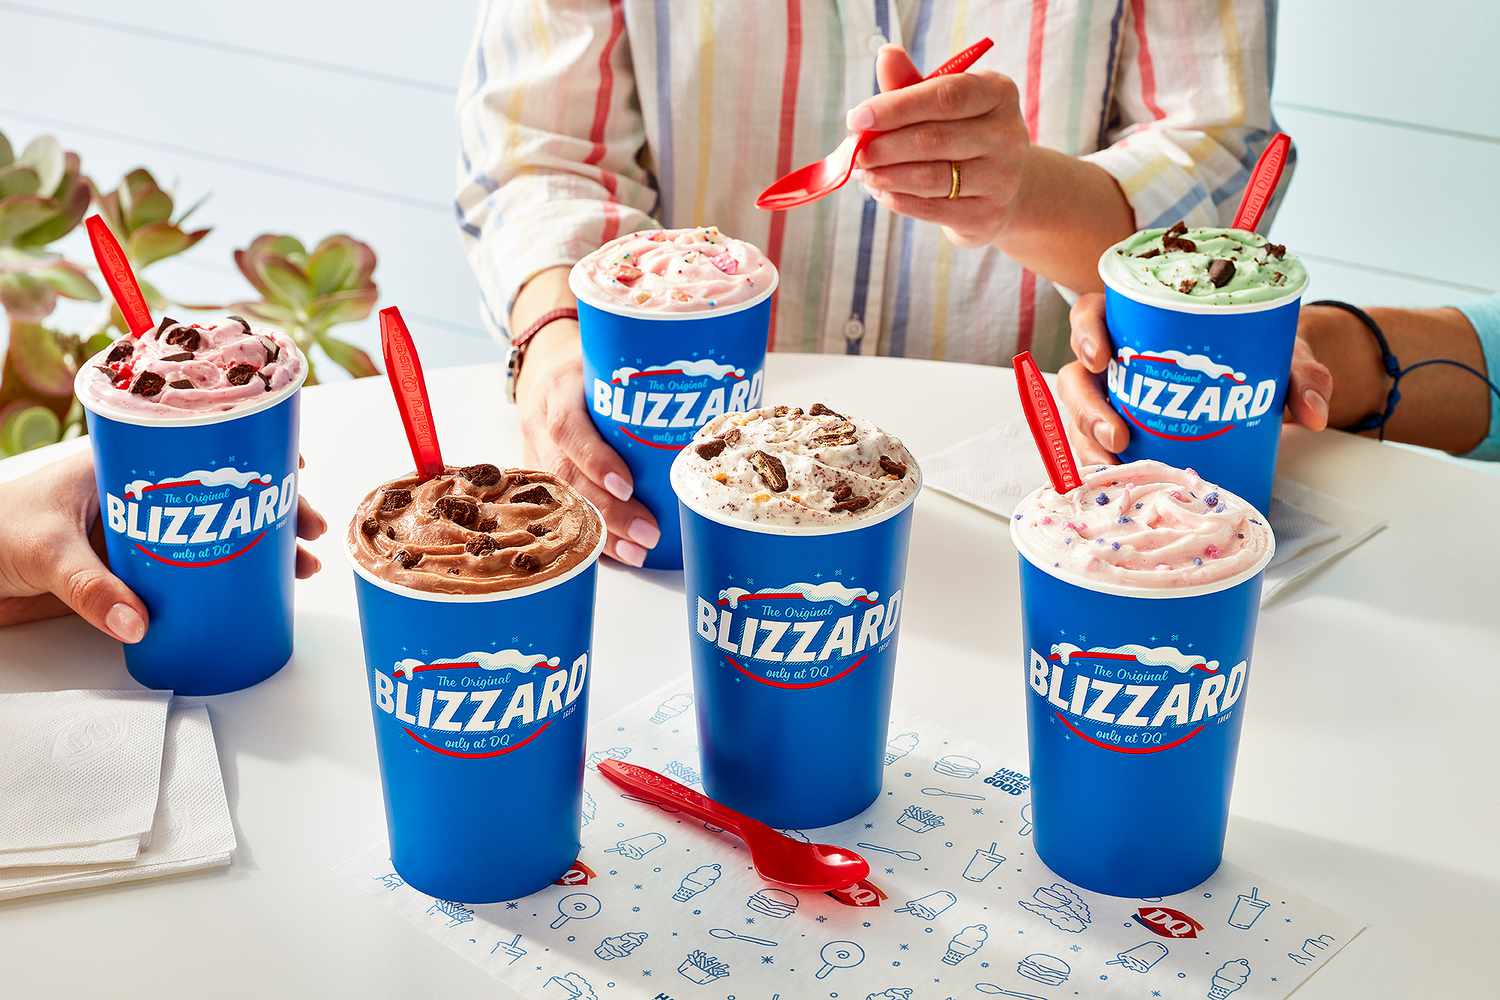 How To Store Dairy Queen Blizzard